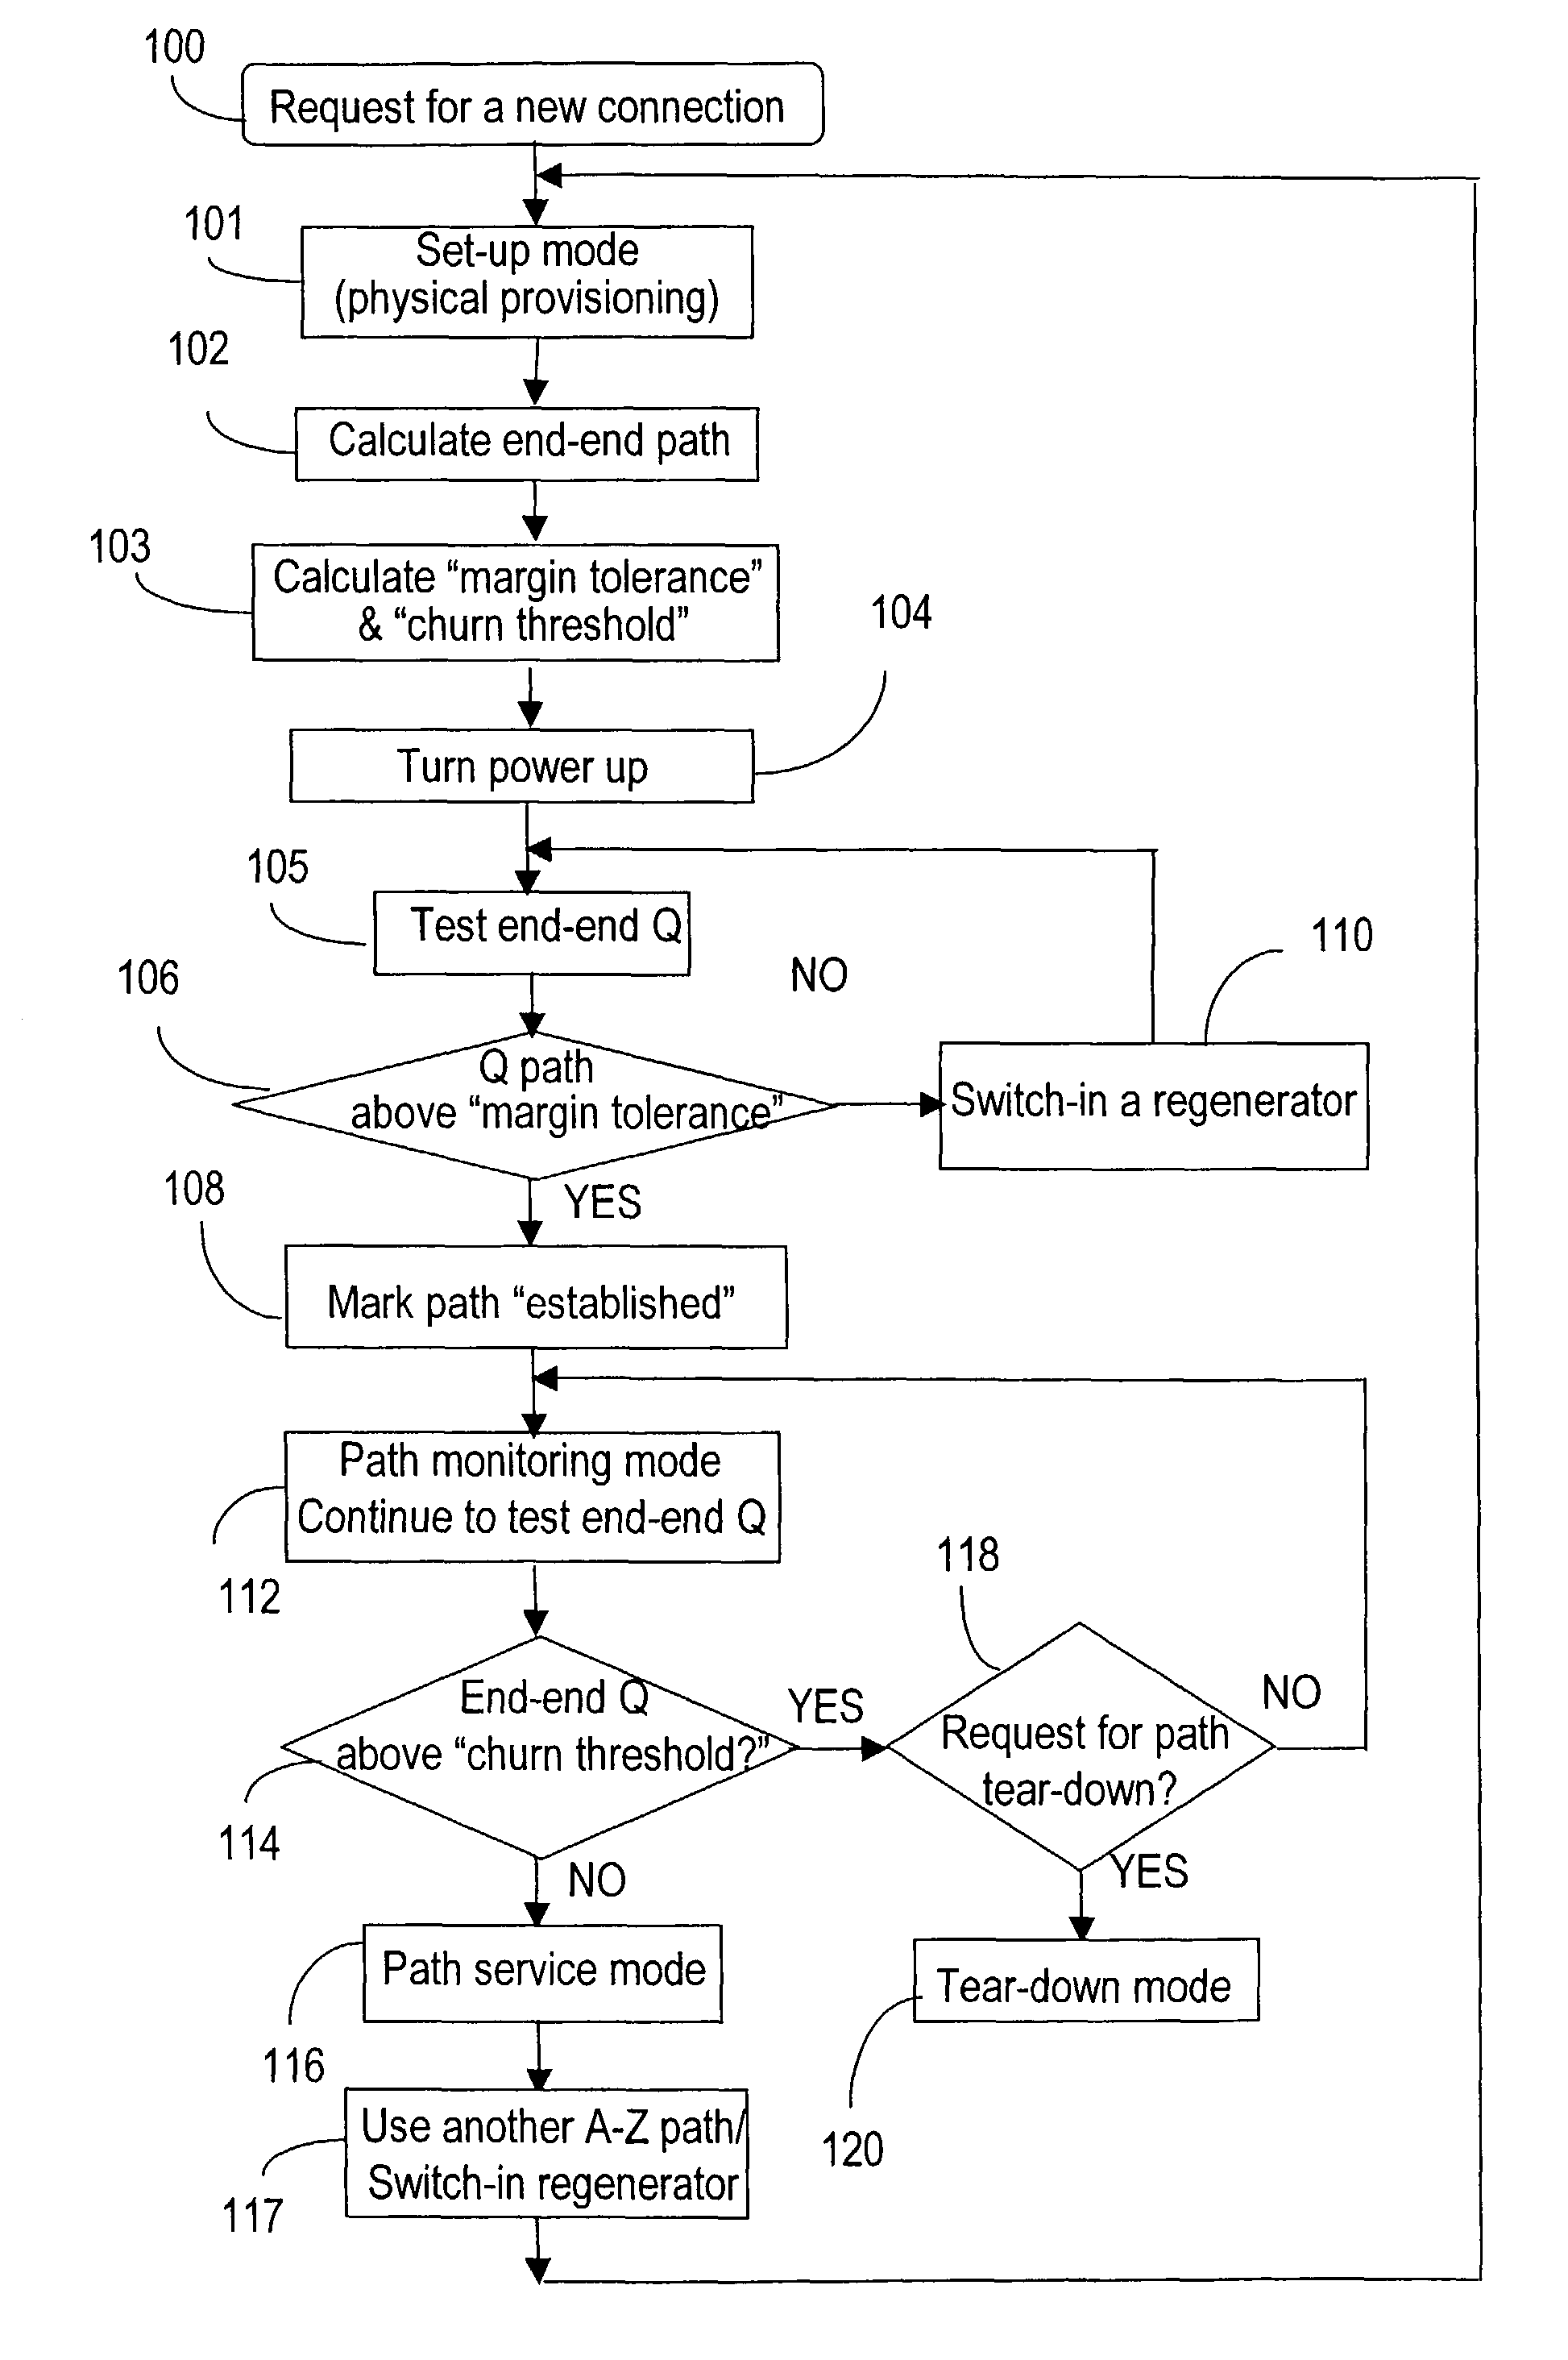 Method for engineering connections in a dynamically reconfigurable photonic switched network